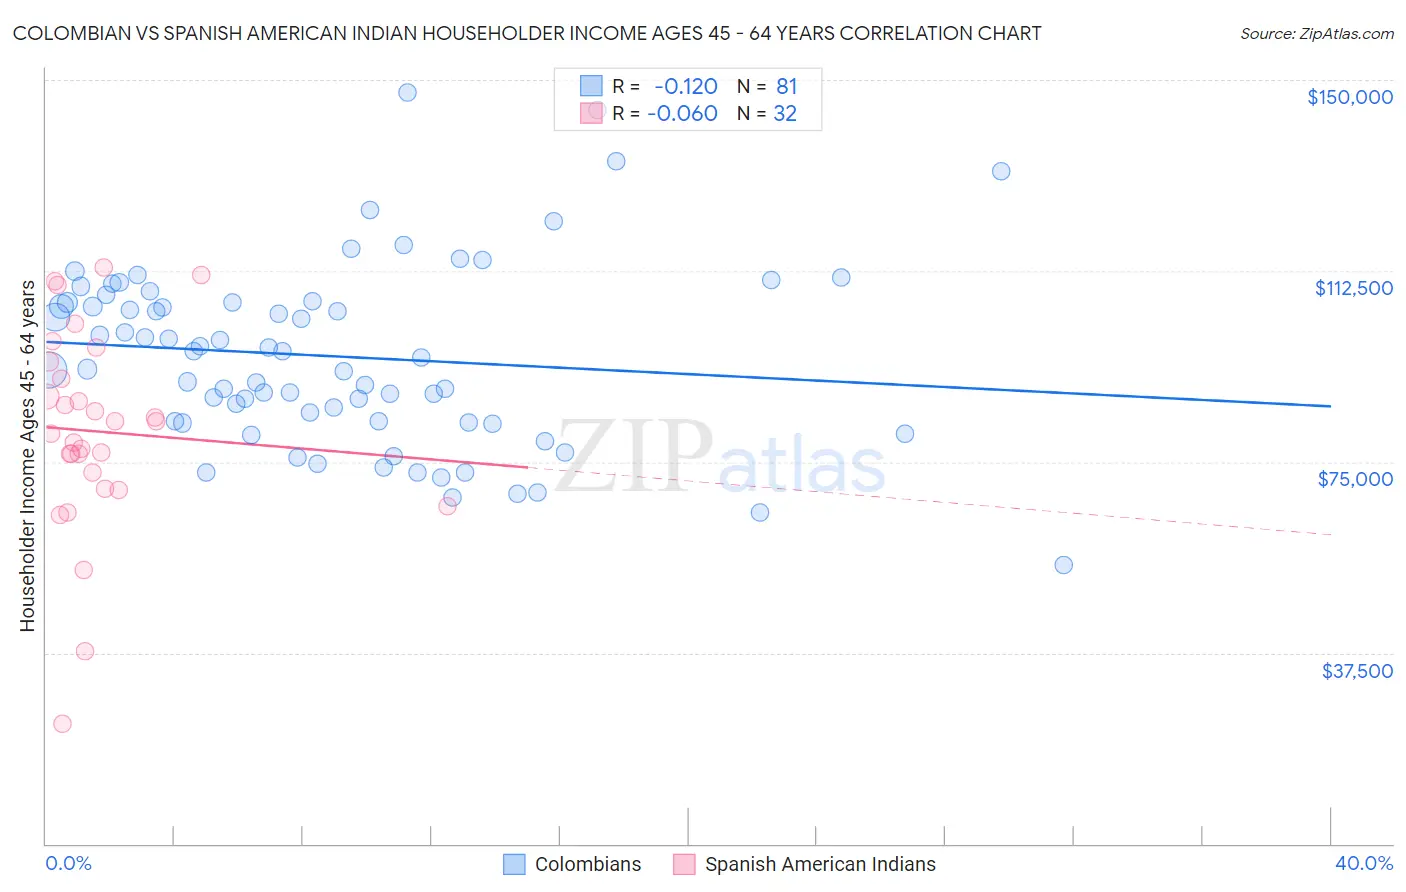 Colombian vs Spanish American Indian Householder Income Ages 45 - 64 years